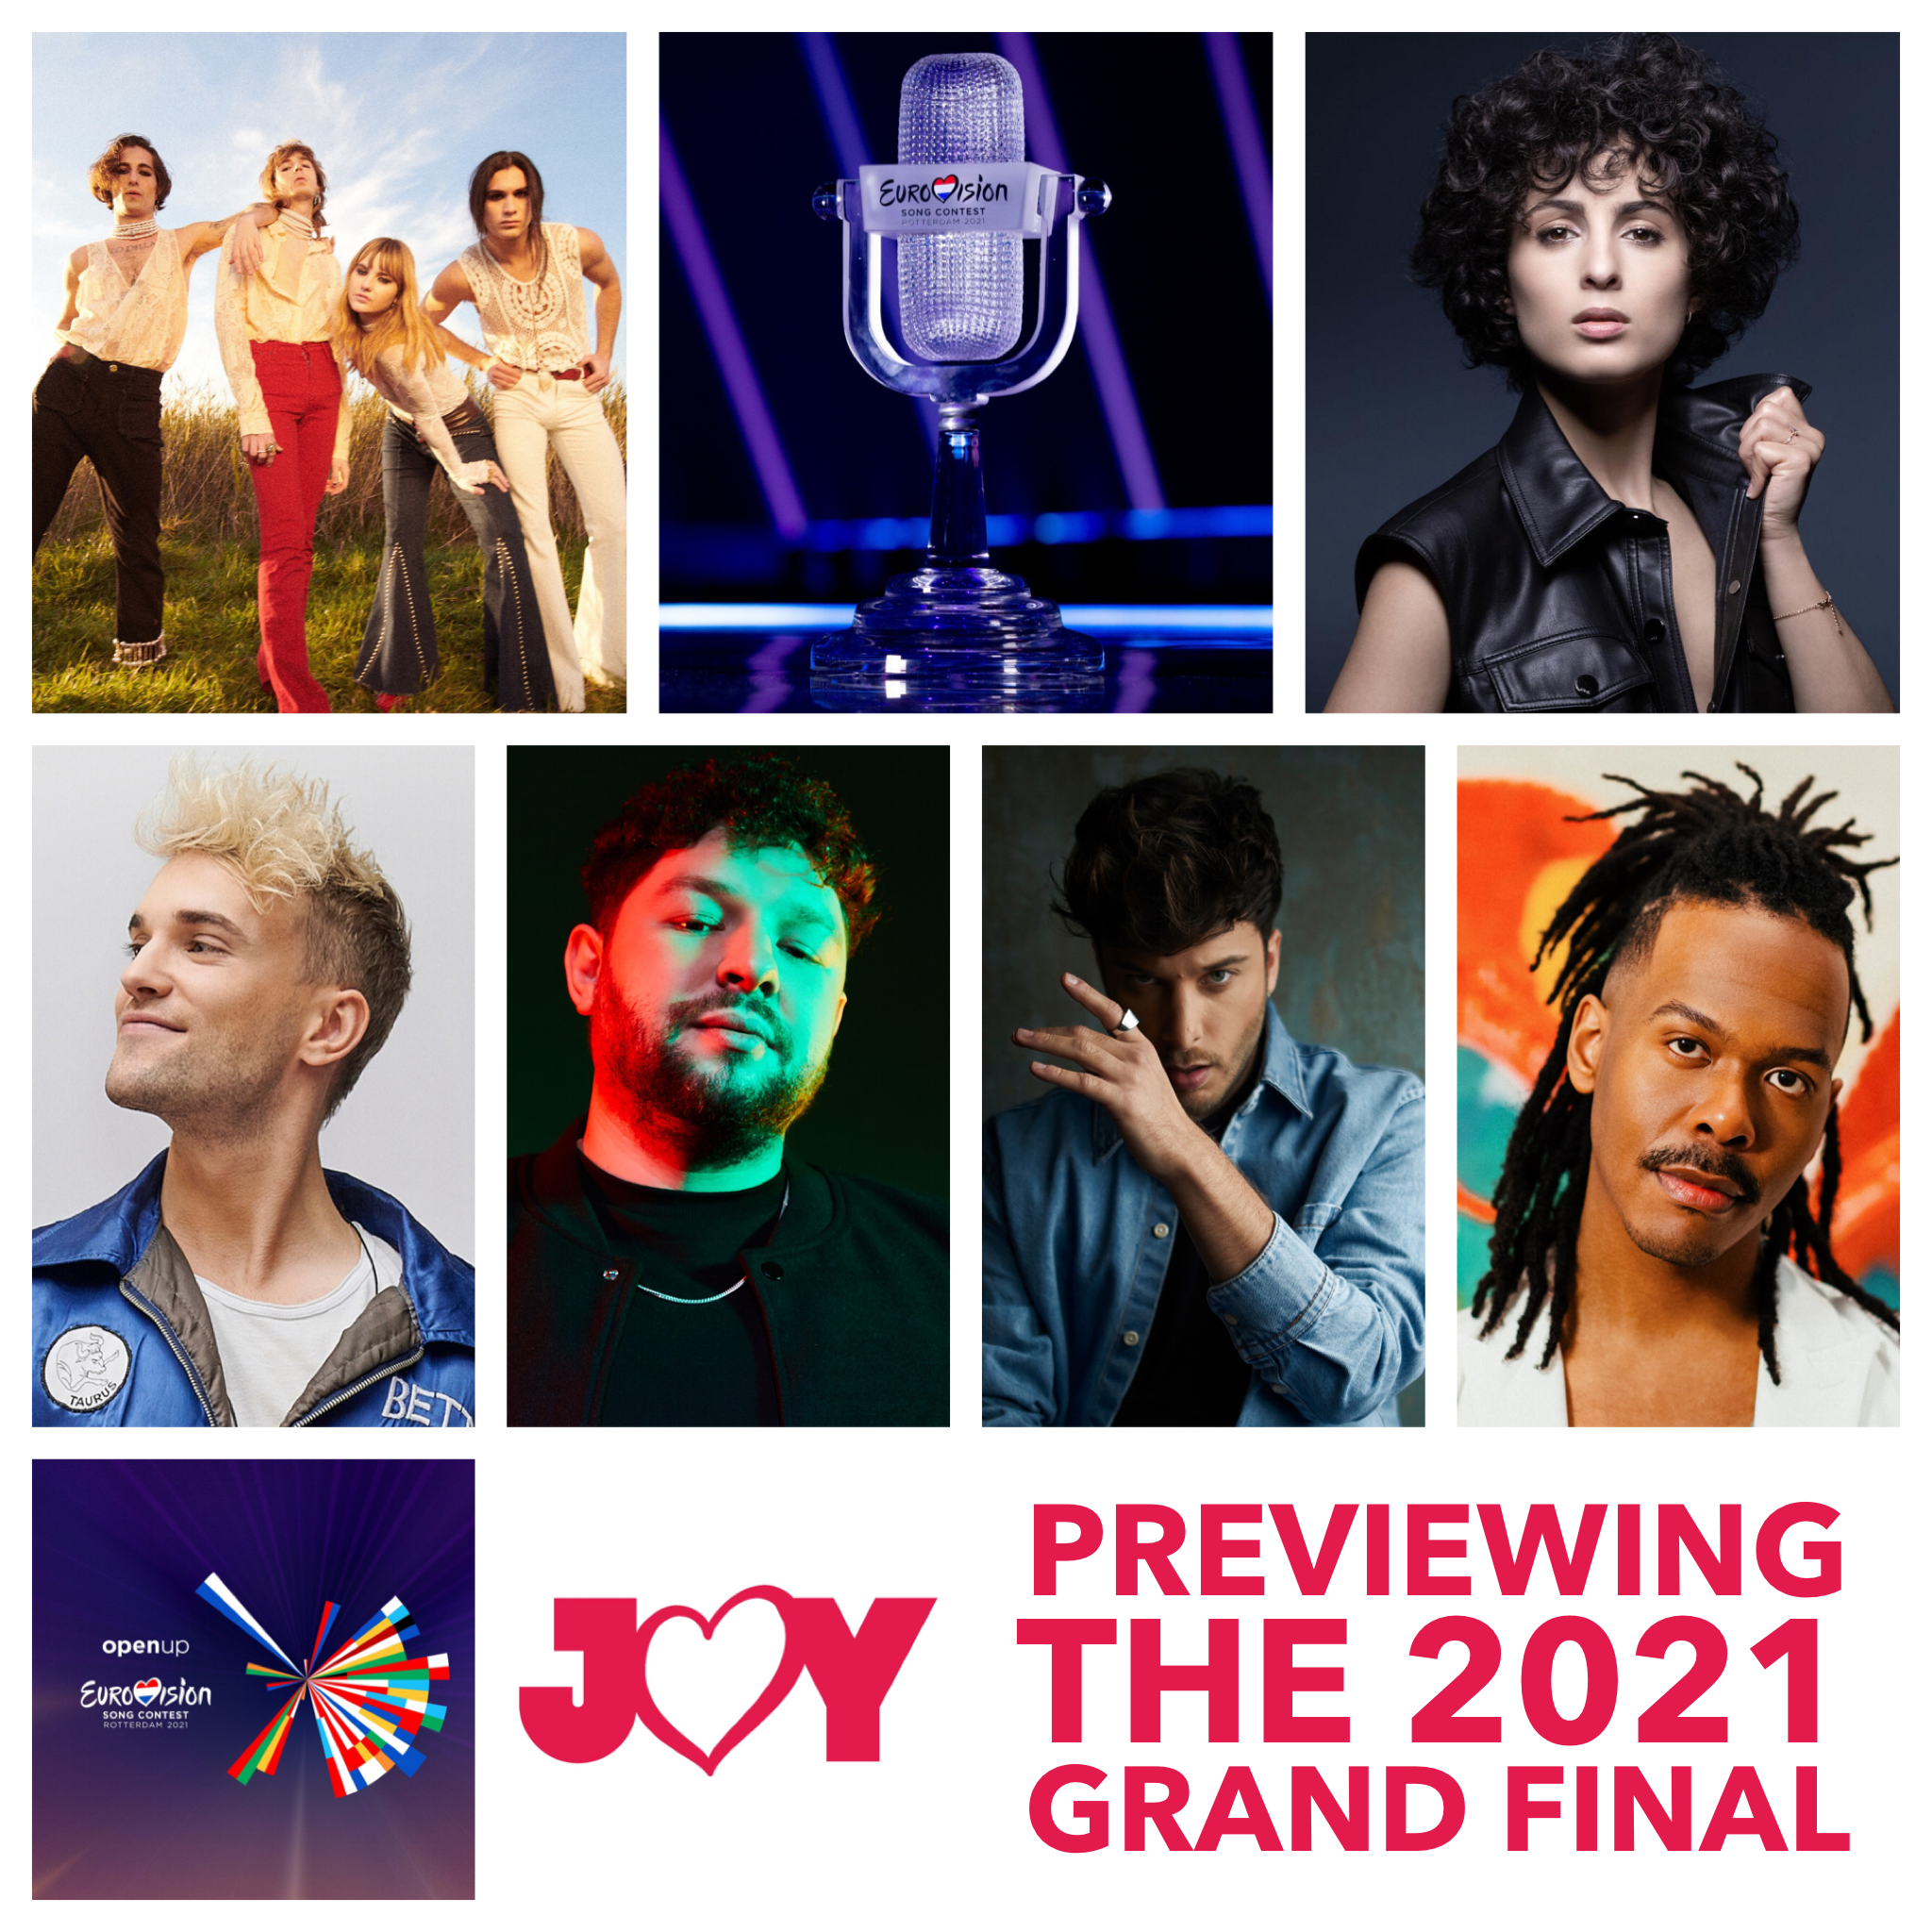 #OpenUp: Previewing the Eurovision 2021 Grand Final